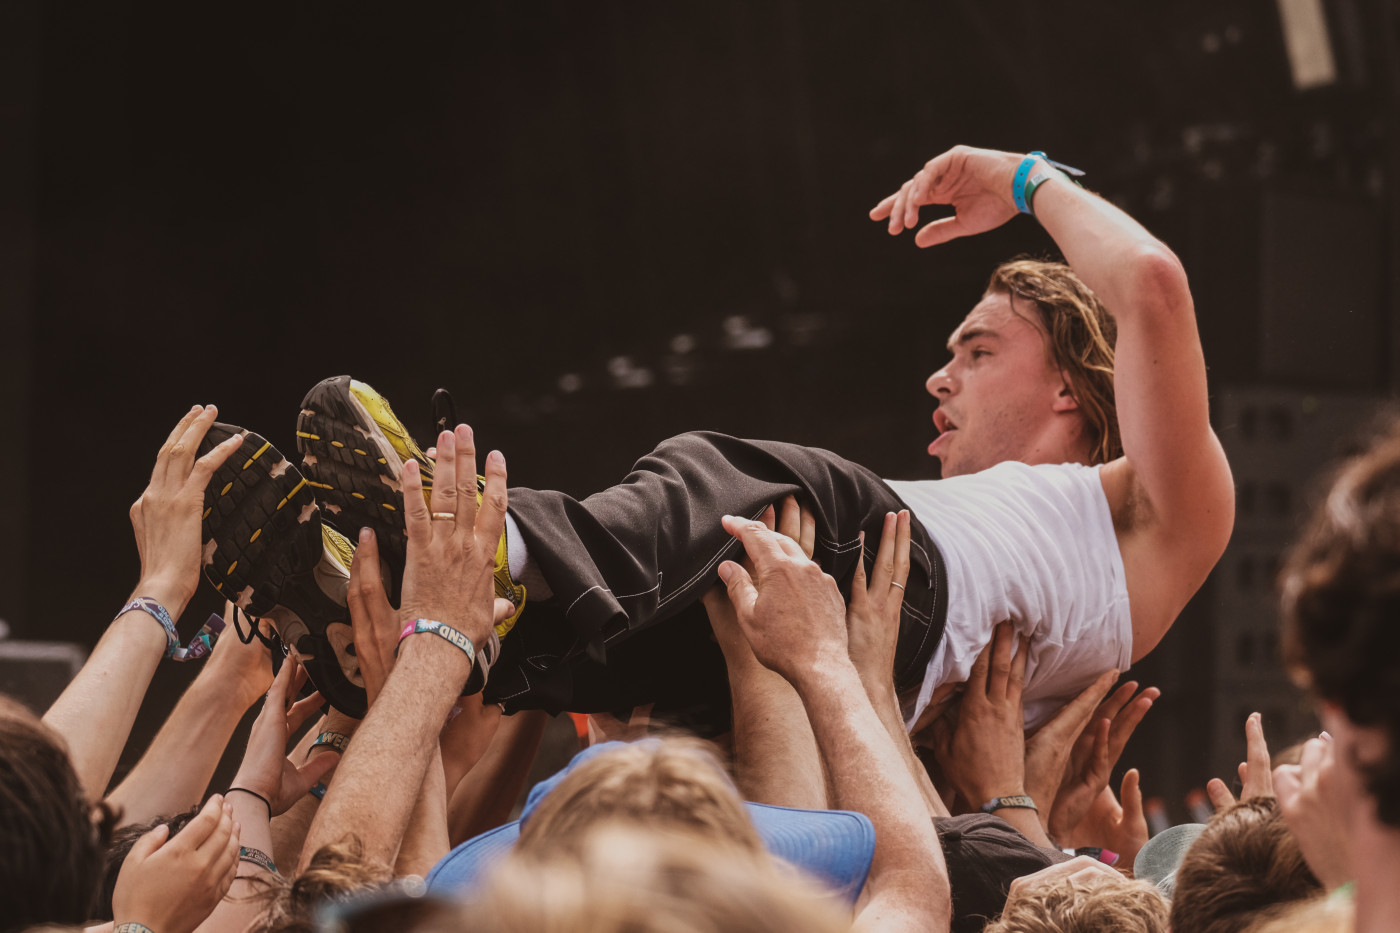 Alex Rice of Sports Team crowdsurfs during his band's performance.